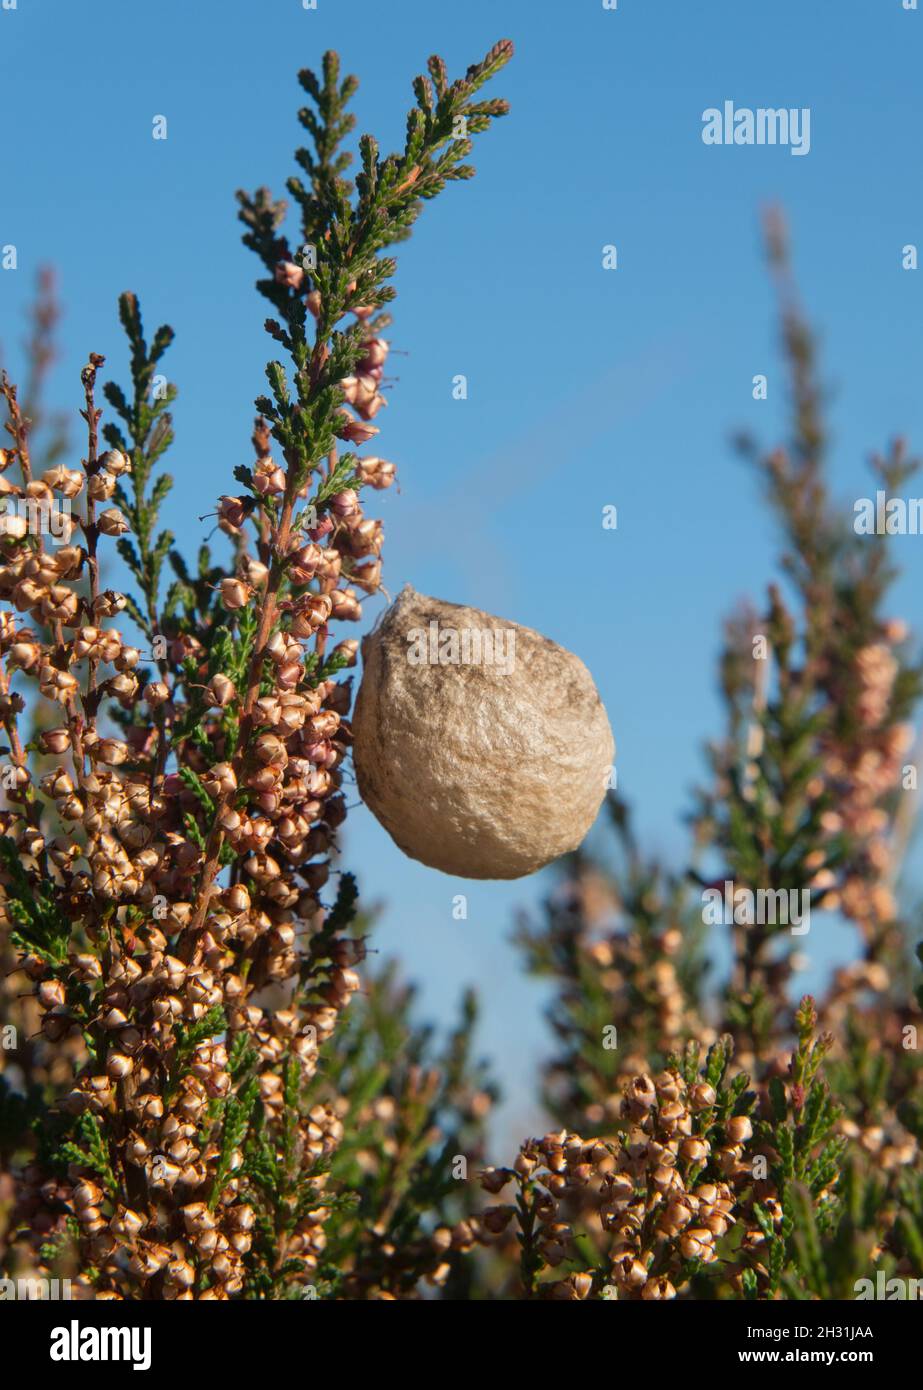 Egg sac of Wasp spider in Common heather under blue sky Stock Photo